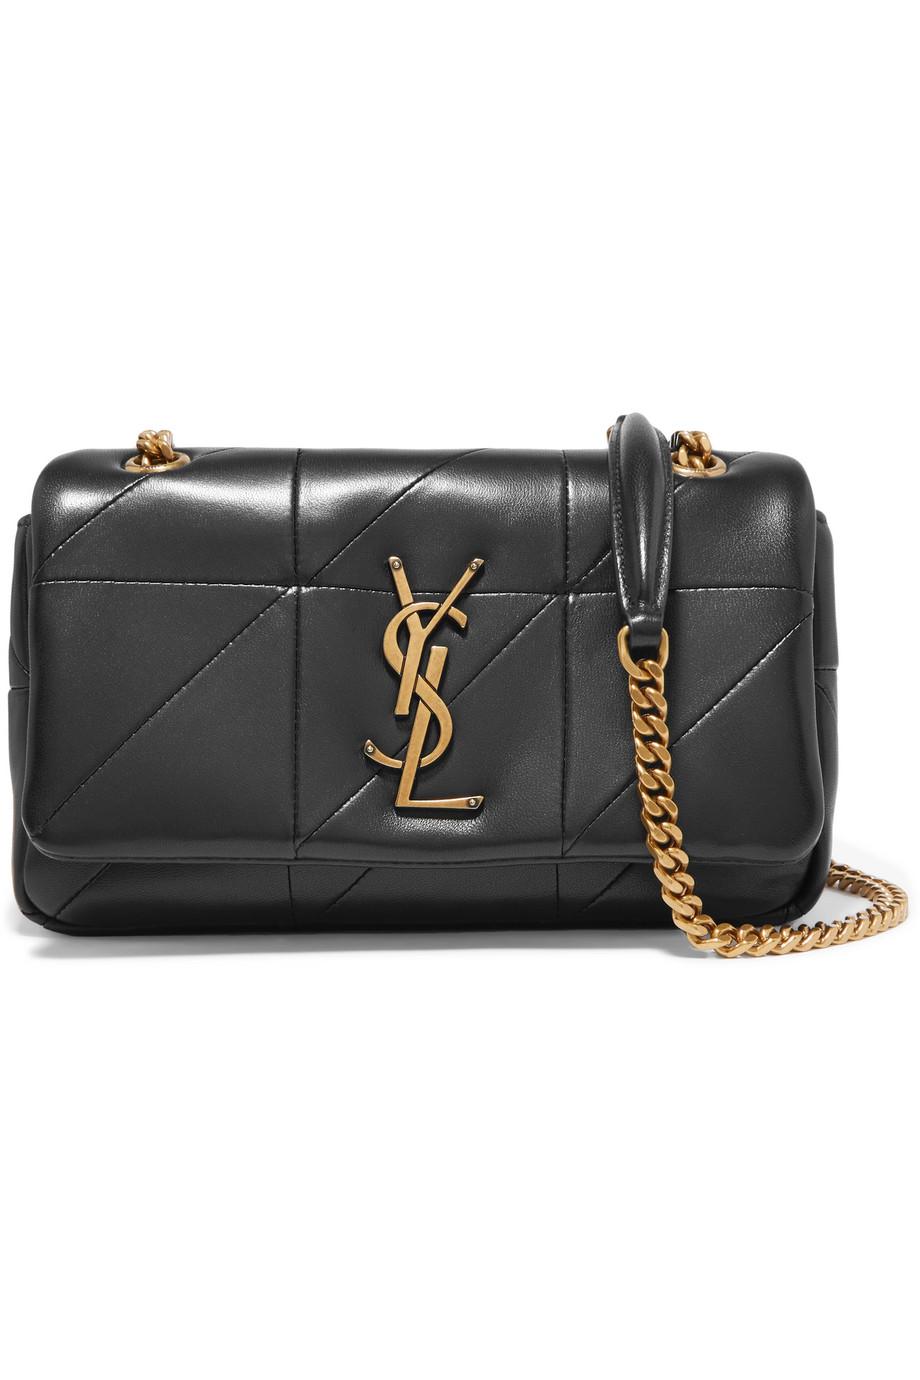 Lyst - Saint Laurent Jamie Small Quilted Leather Shoulder Bag in Black